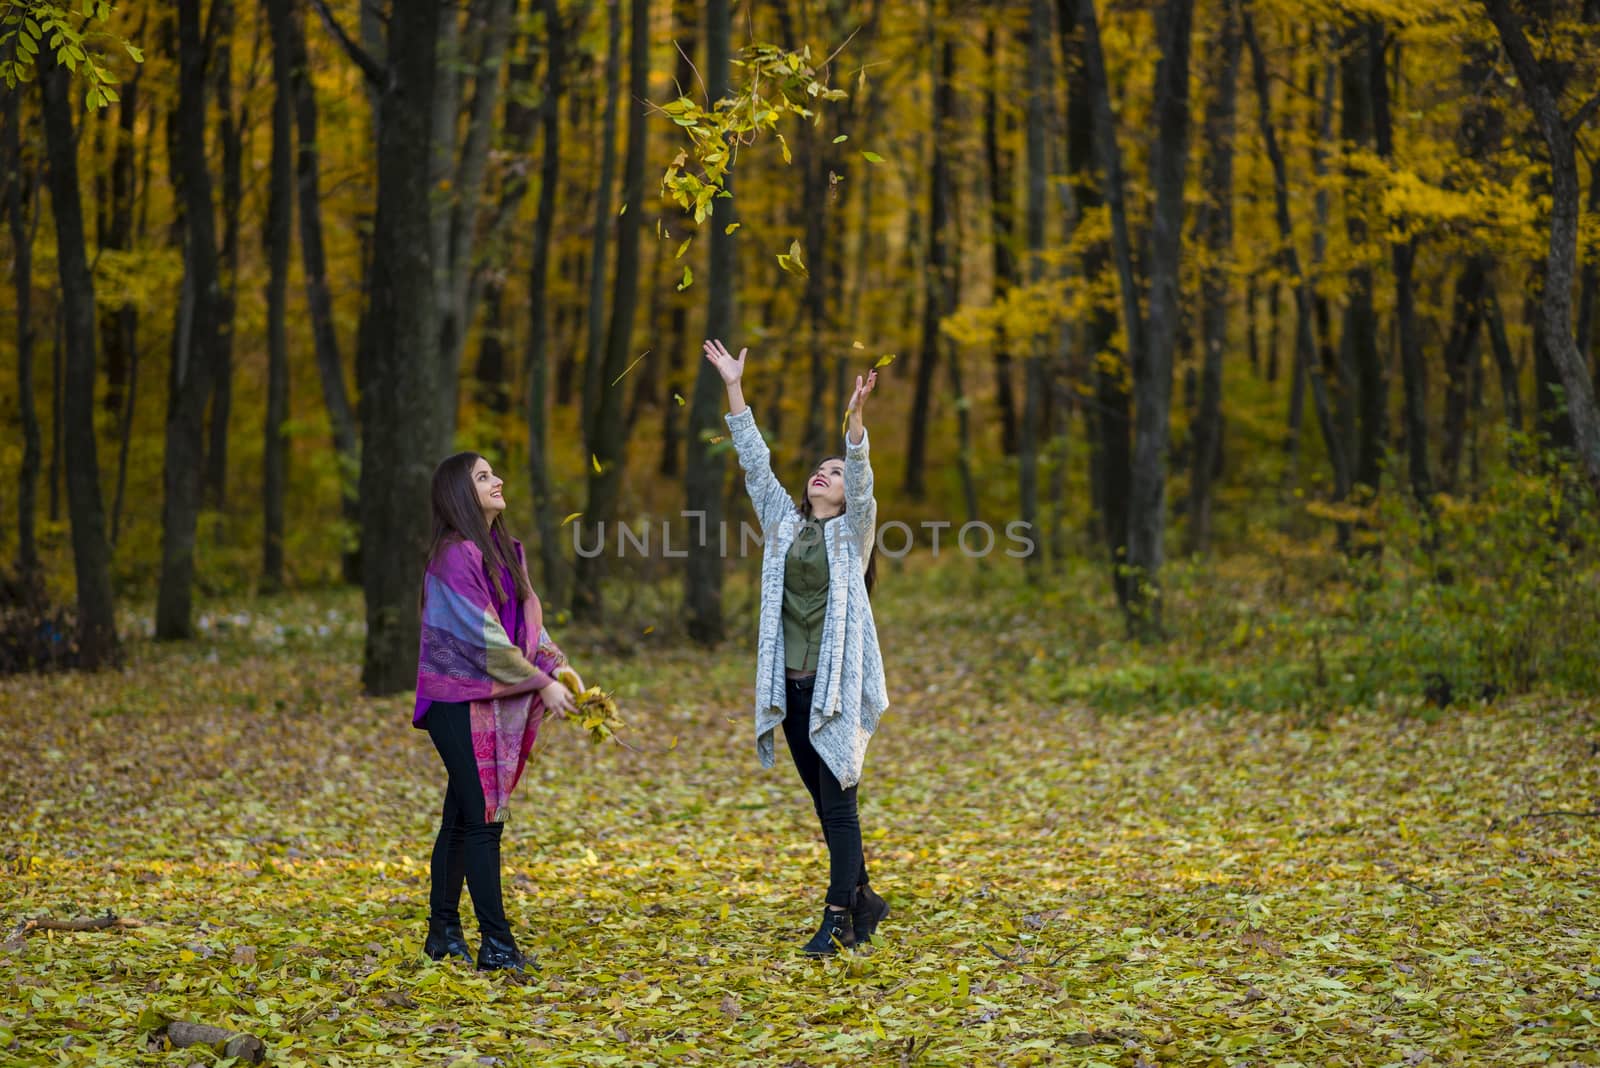 Leaves are in the air. Two teenager girls throwing yellow leaves up in a forest and having fun.